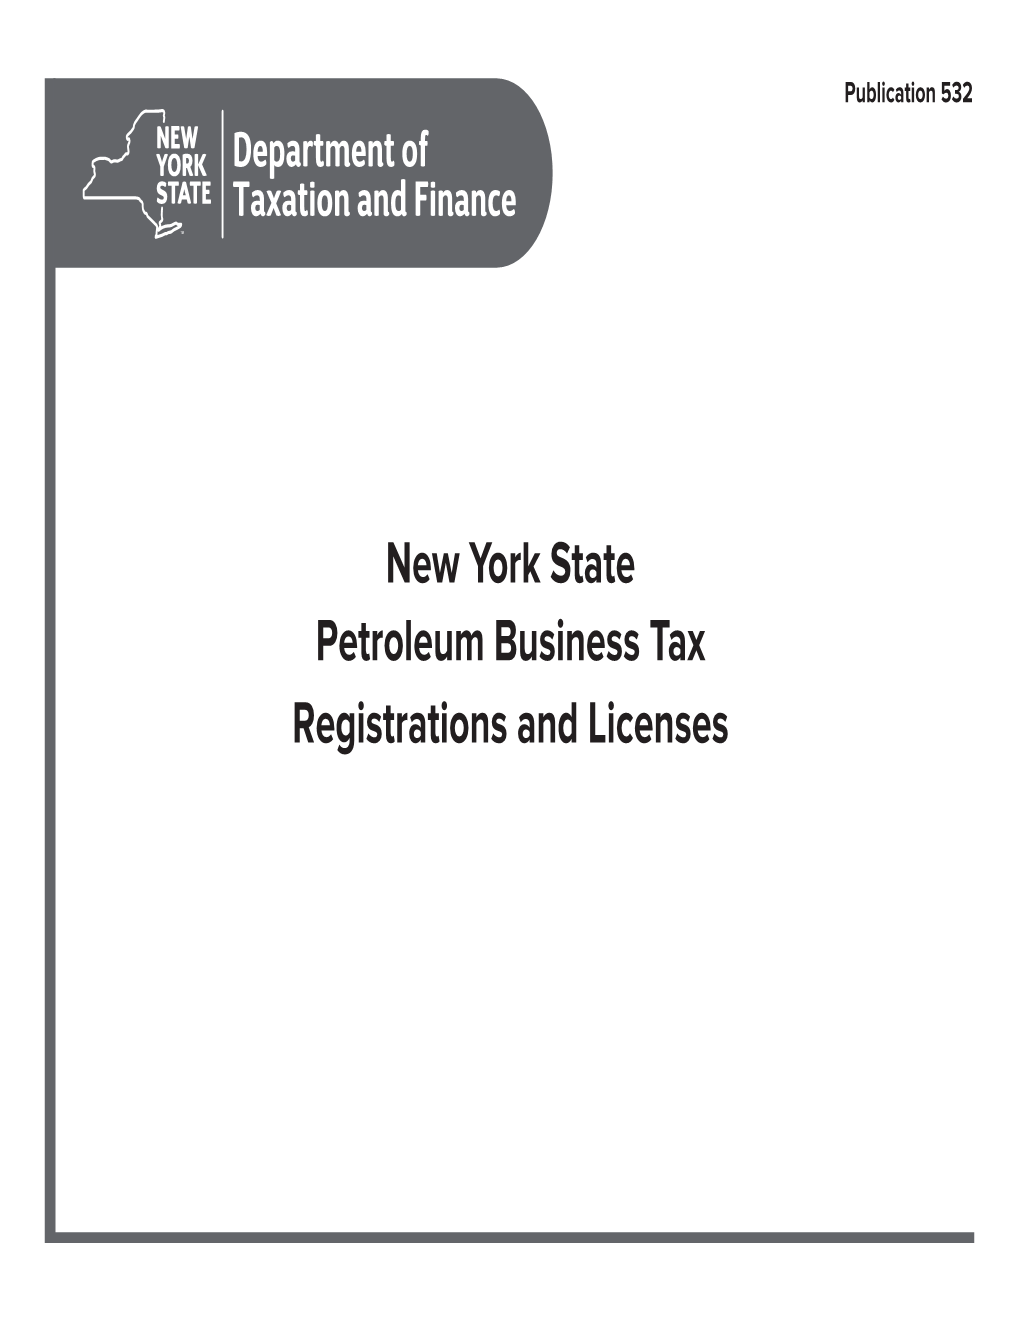 Publication 532:08/20:New York State Petroleum Business Tax